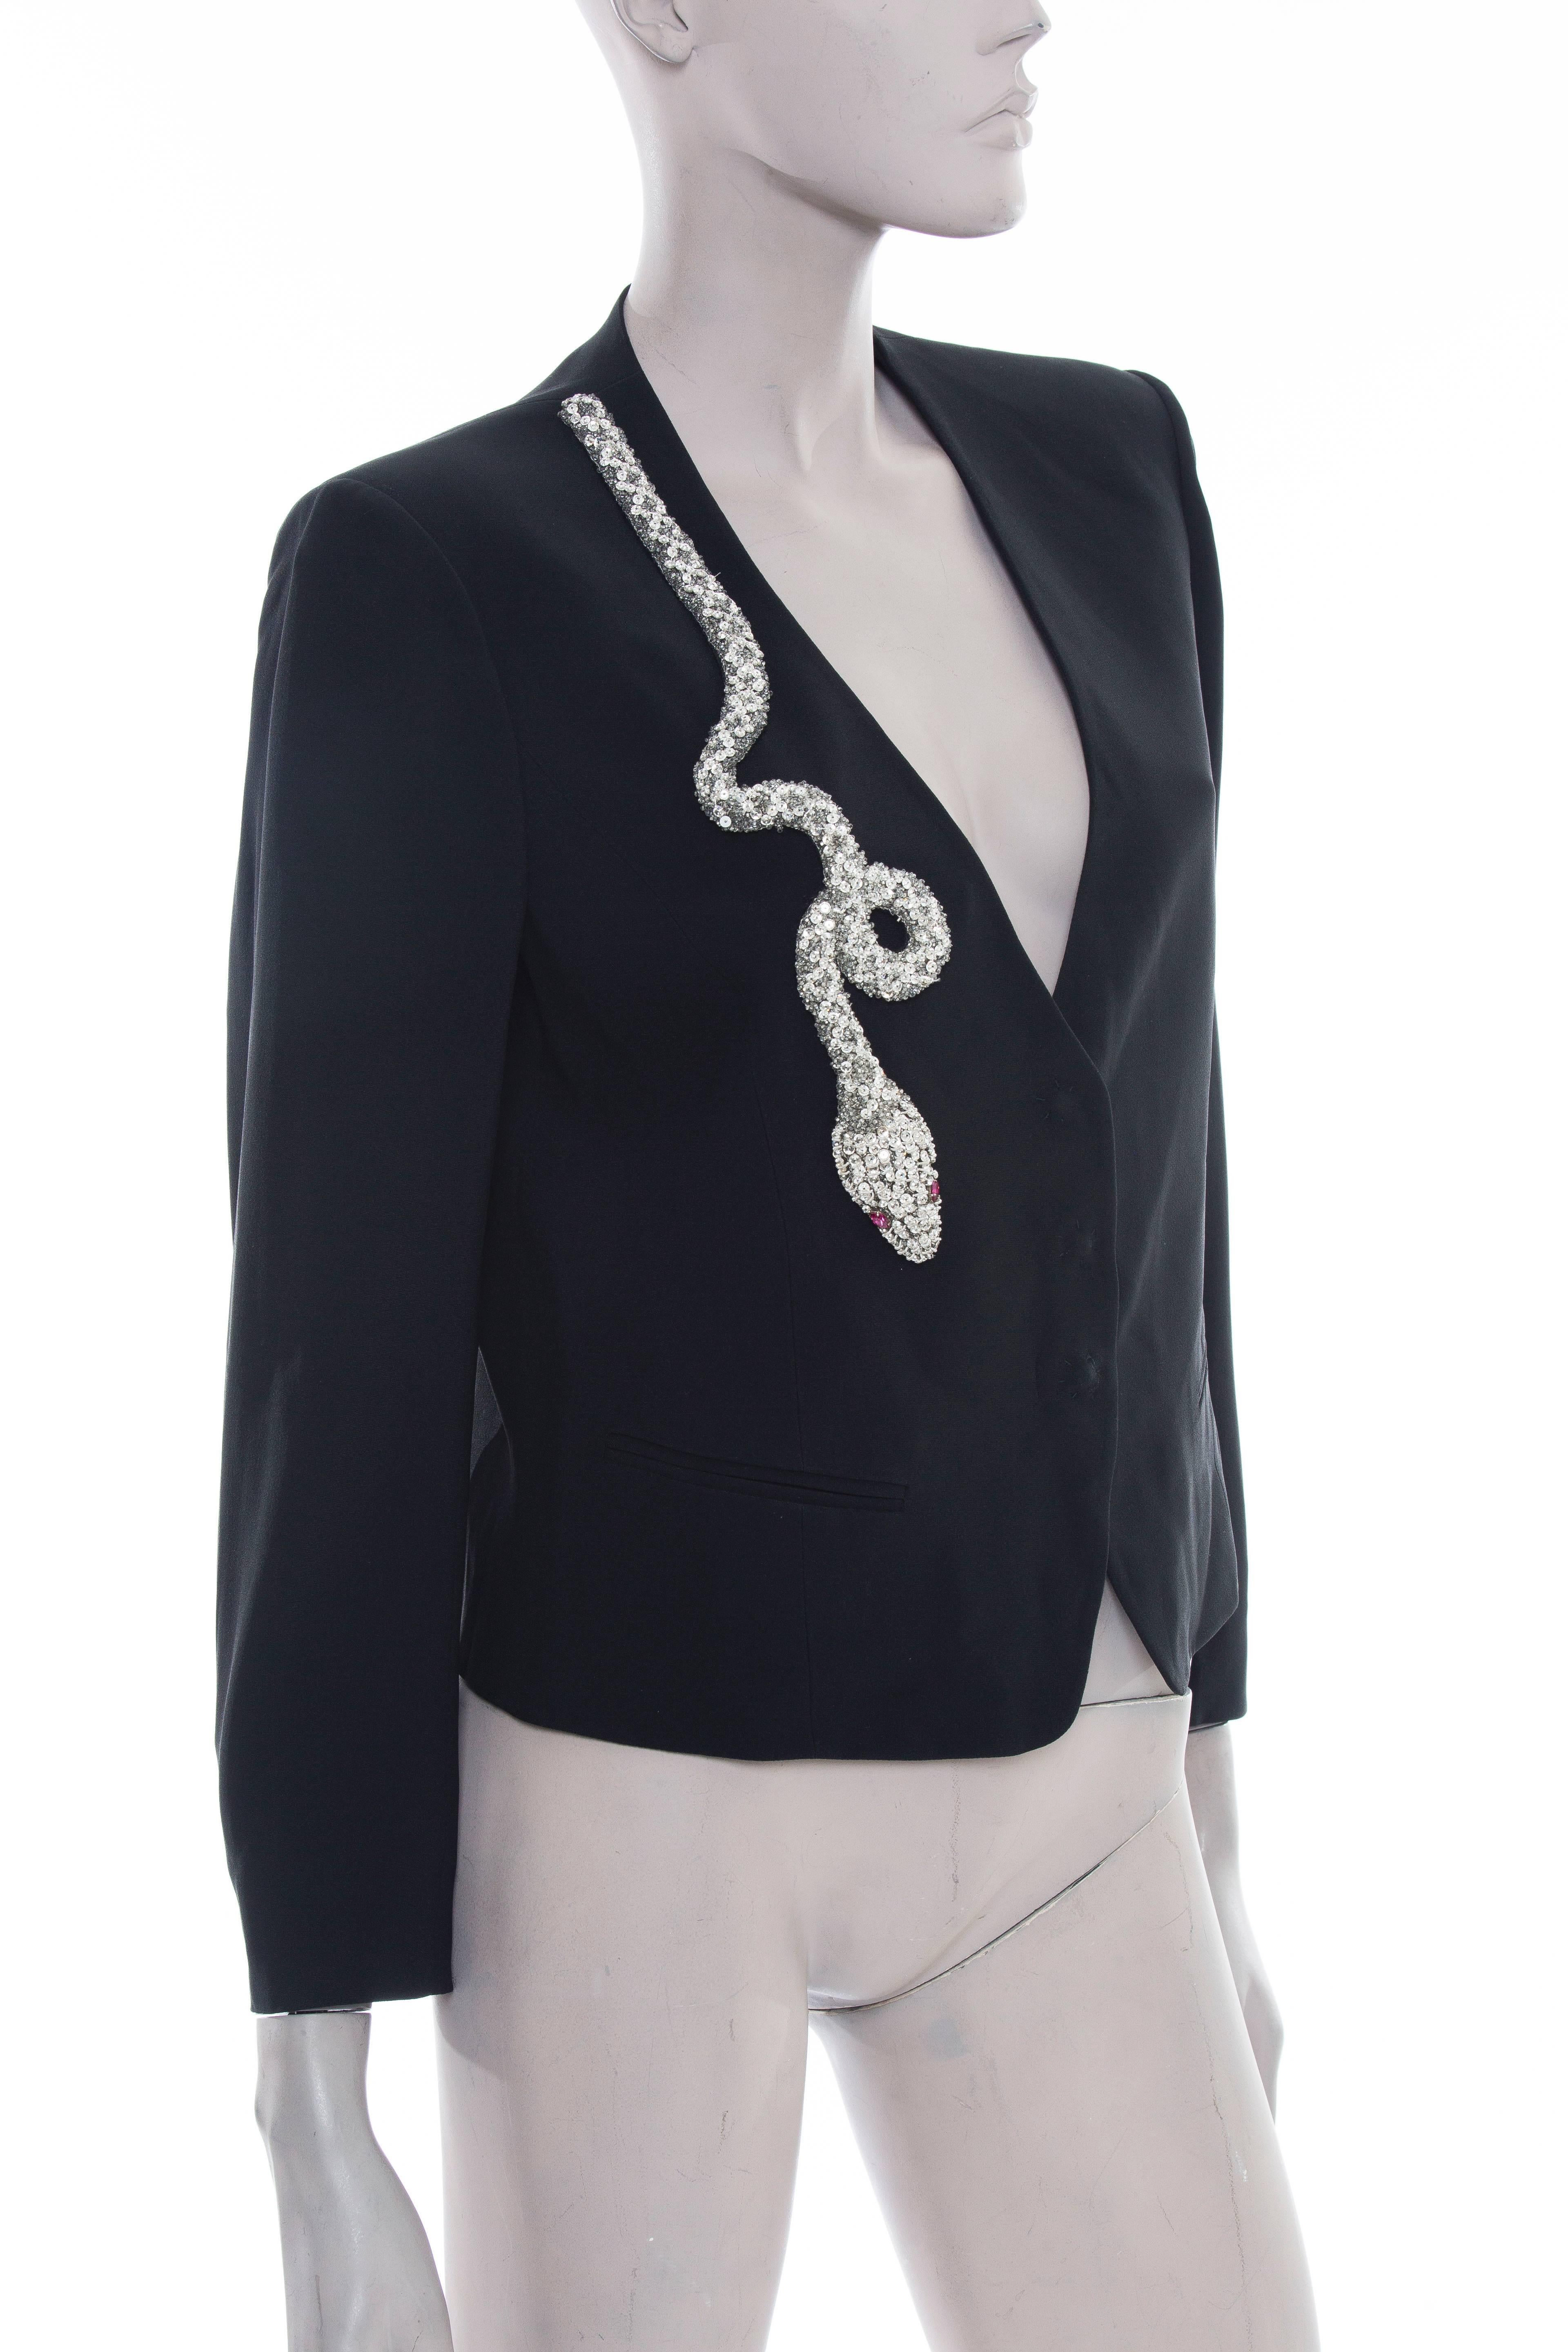 Sonia Rykiel blazer with sequin diamanté snake, dual welt pockets at front and concealed snap closure.

Bust 40”, Waist 36”, Shoulder 16”, Length 22”, Sleeve 22”

Fabric Content: 52% Viscose, 48% Acetate
